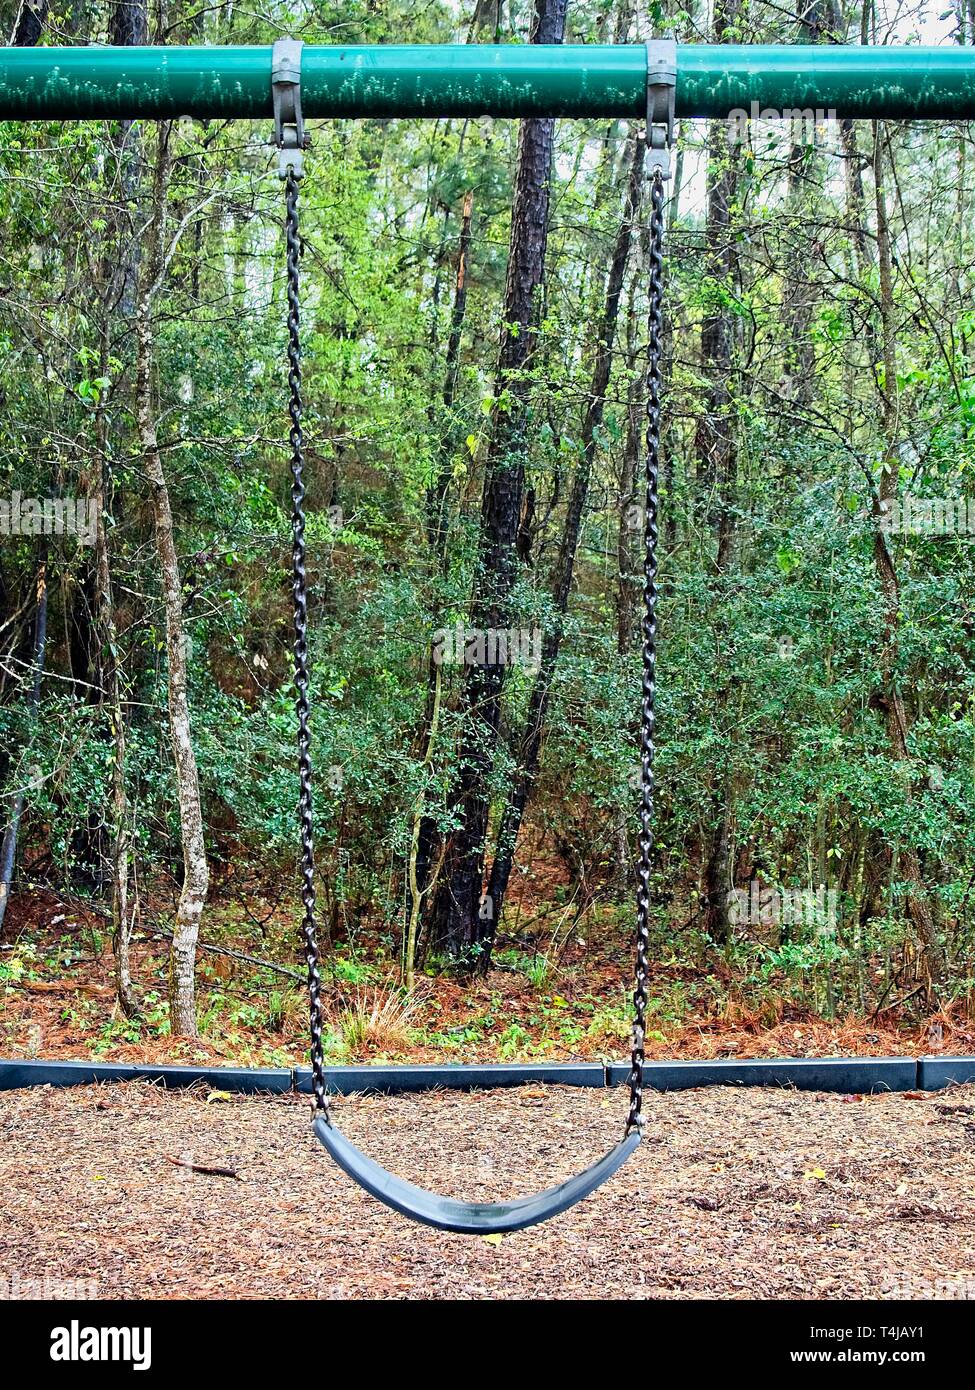 The Woodlands, TX USA  -  03/14/2019  -  Green Swing in Park The Woodlands TX Stock Photo